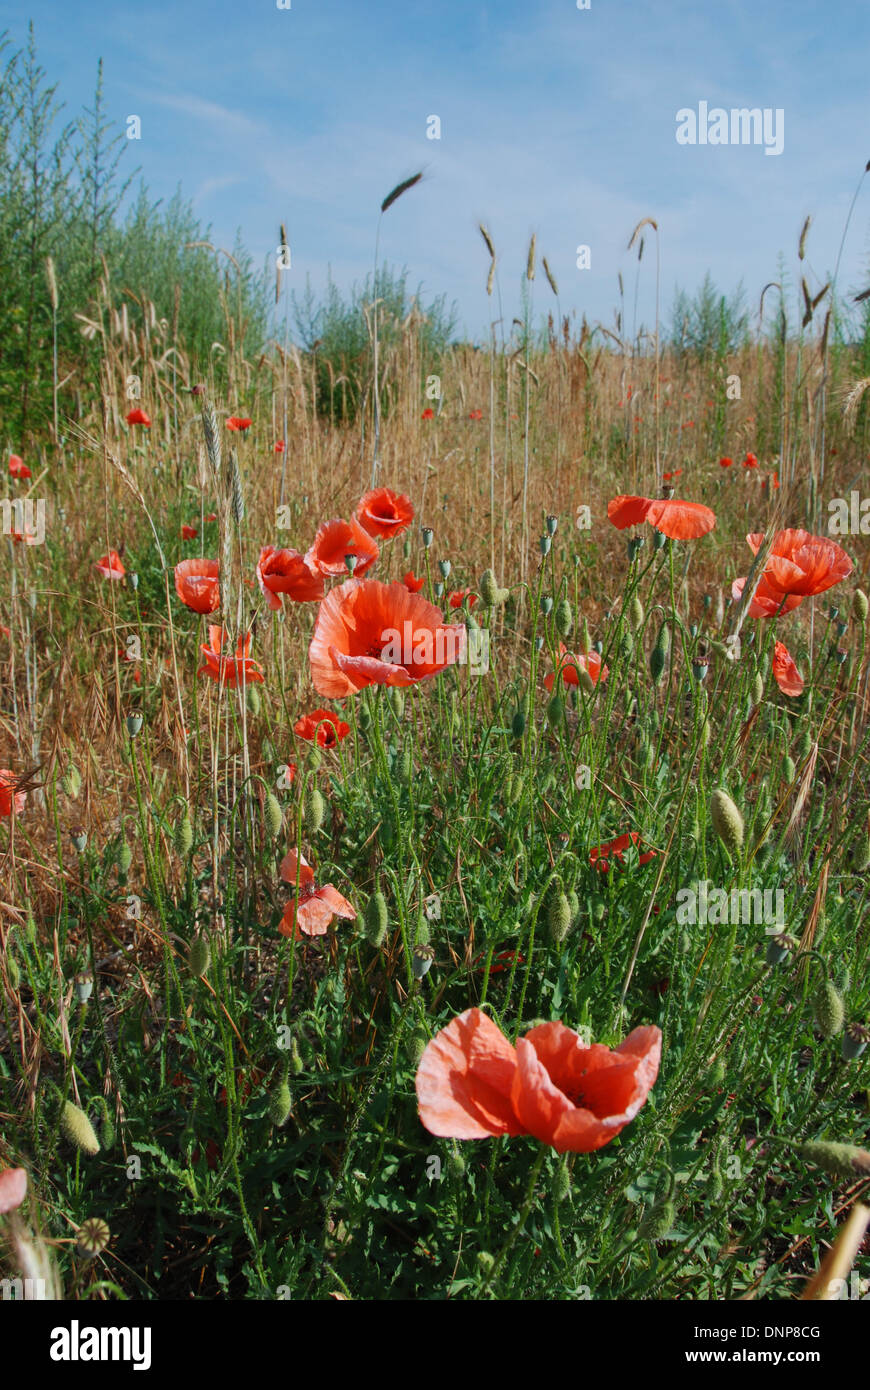 Poppies growing in a field Stock Photo